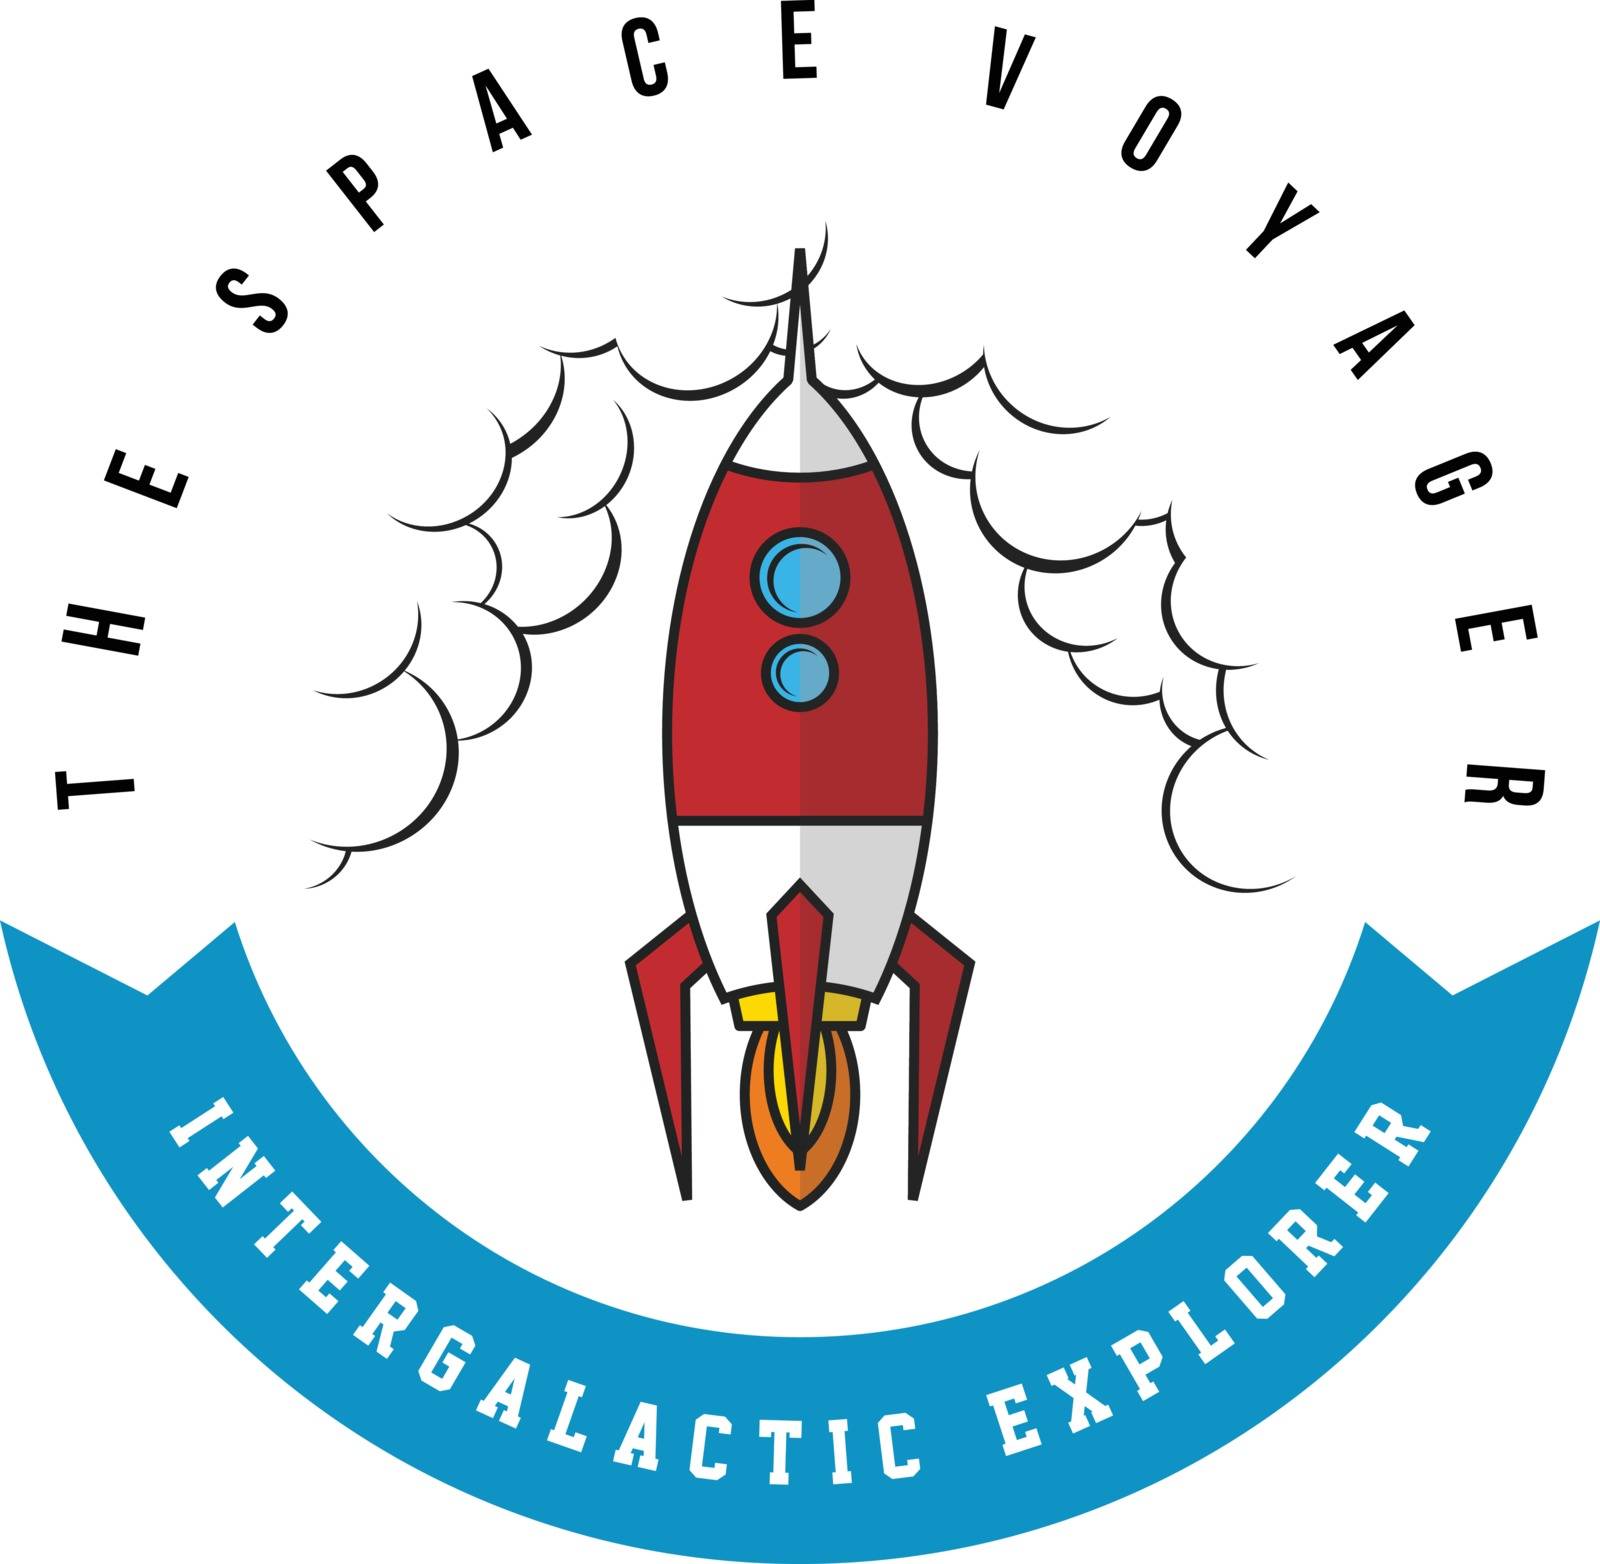 space exploration shuttle ship badge label logo icon by vector1st